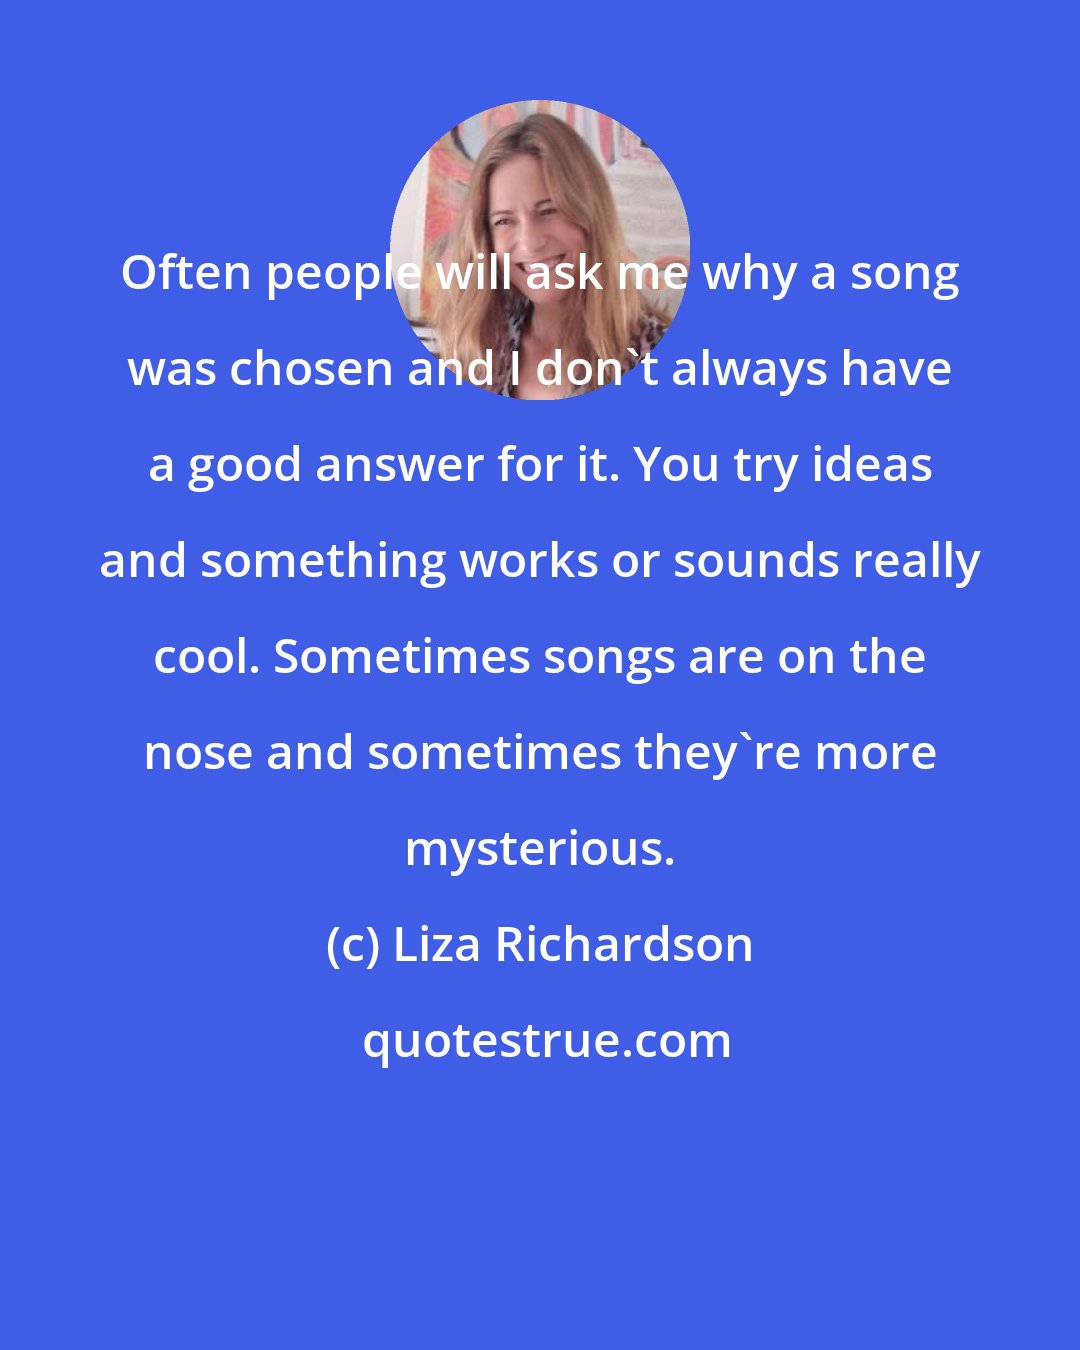 Liza Richardson: Often people will ask me why a song was chosen and I don't always have a good answer for it. You try ideas and something works or sounds really cool. Sometimes songs are on the nose and sometimes they're more mysterious.